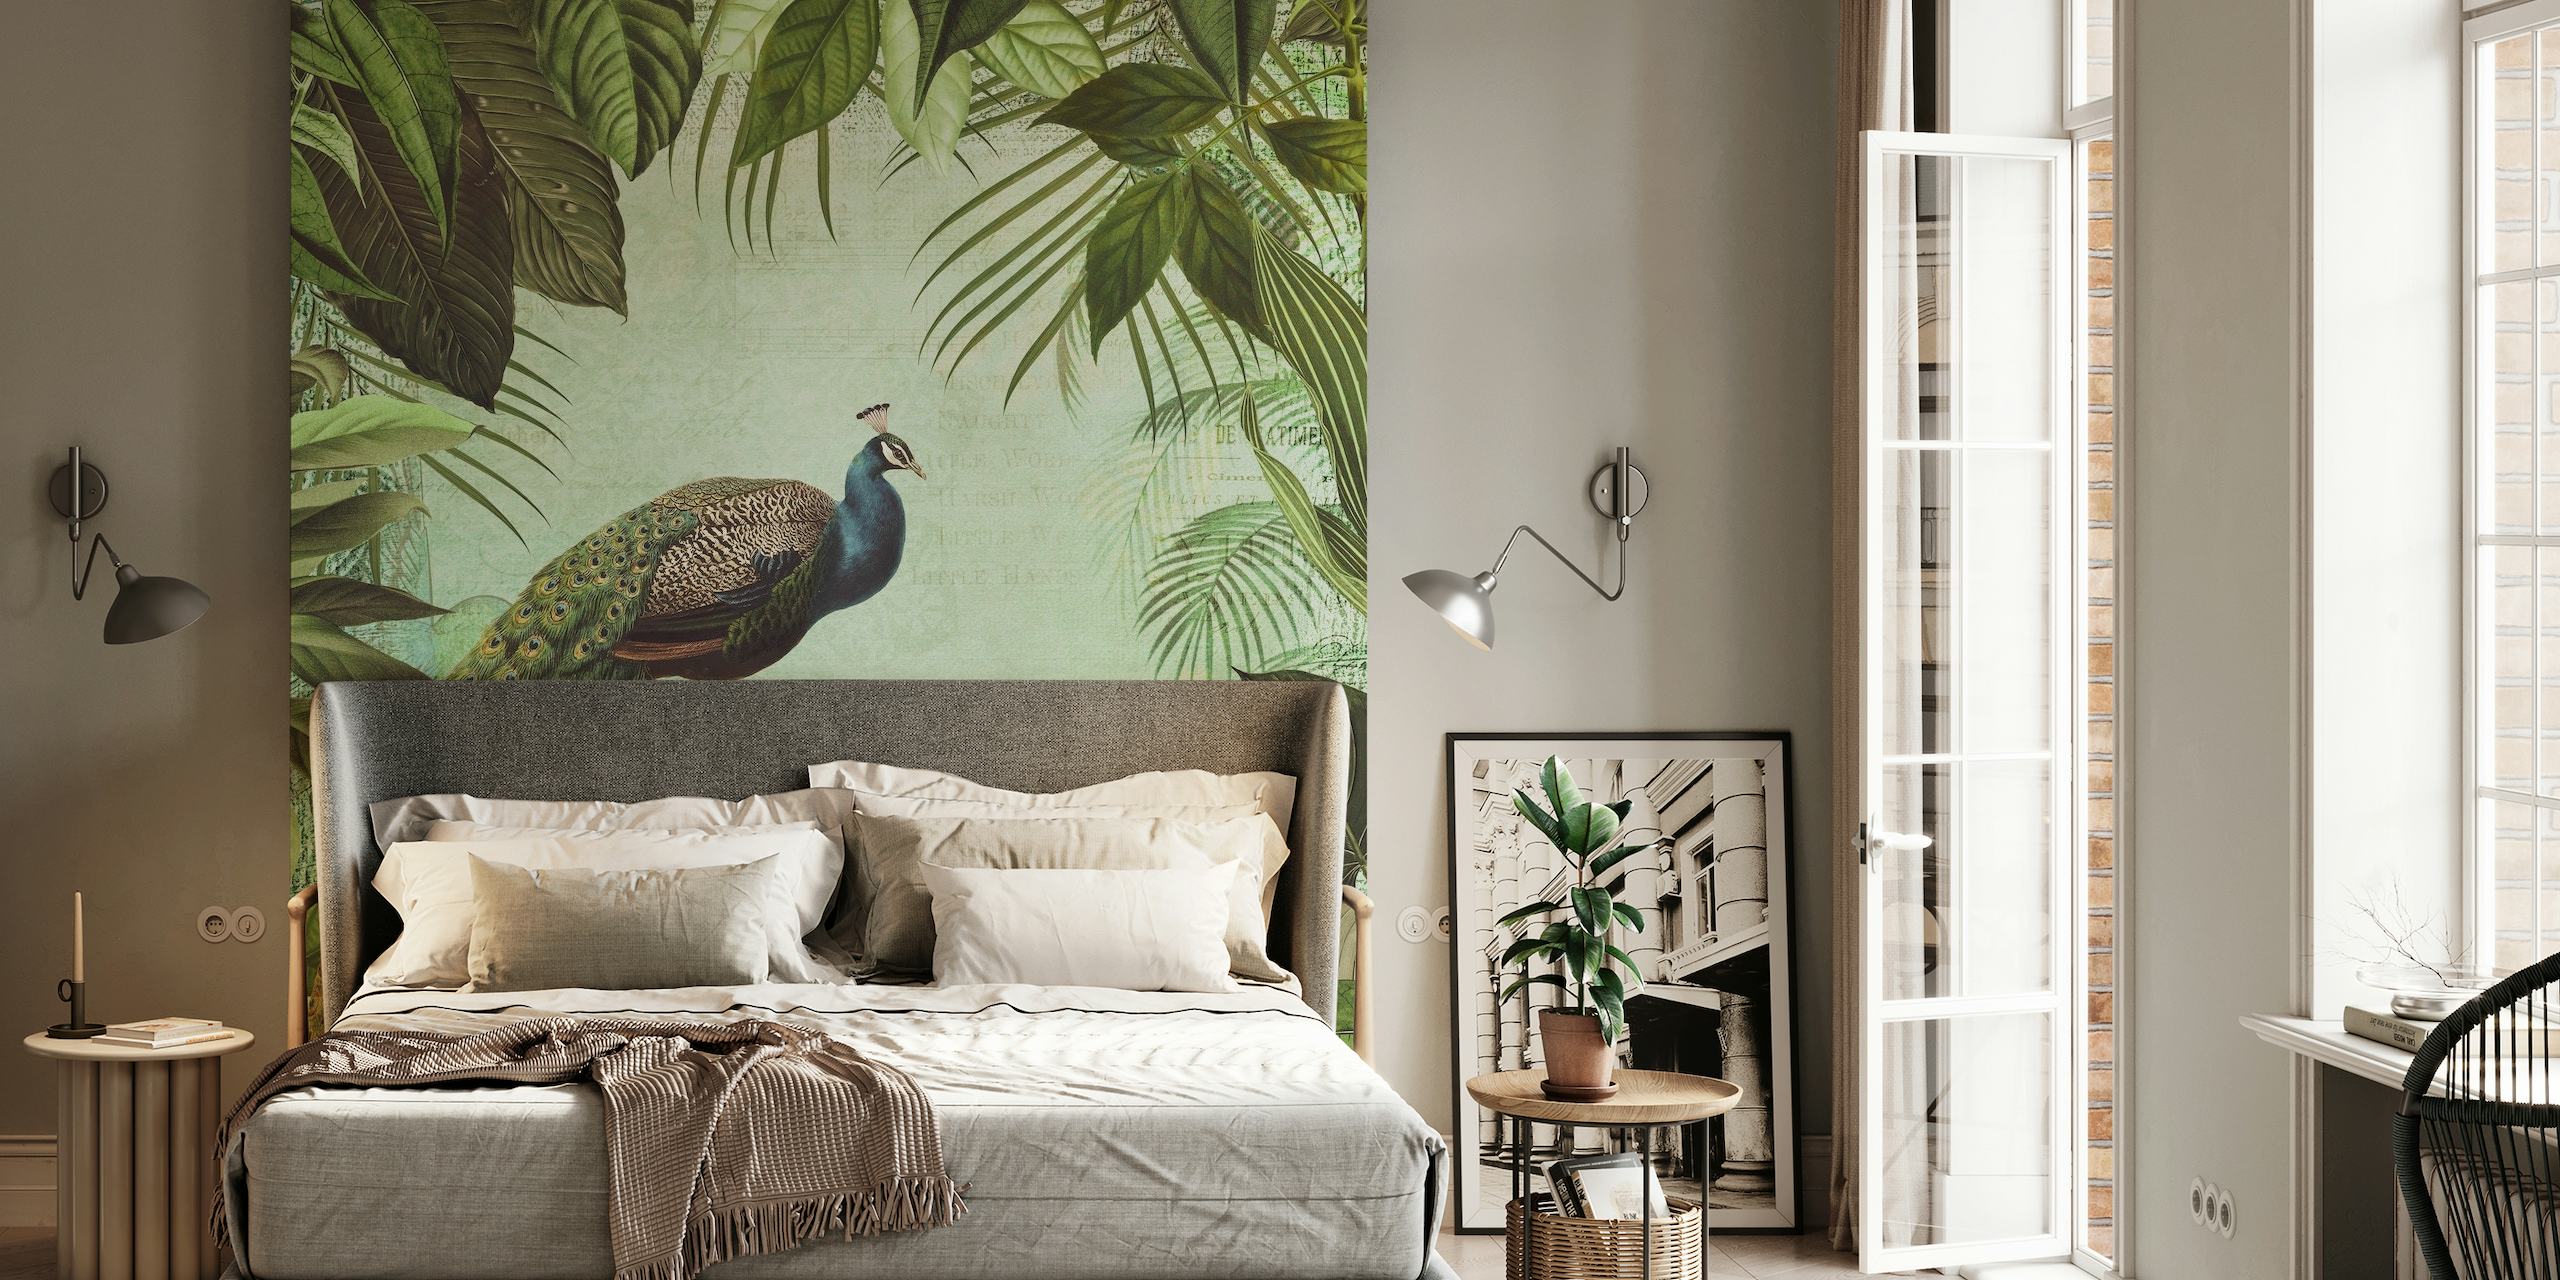 Peacocks with lush green foliage on a wall mural creating a fantasy world atmosphere